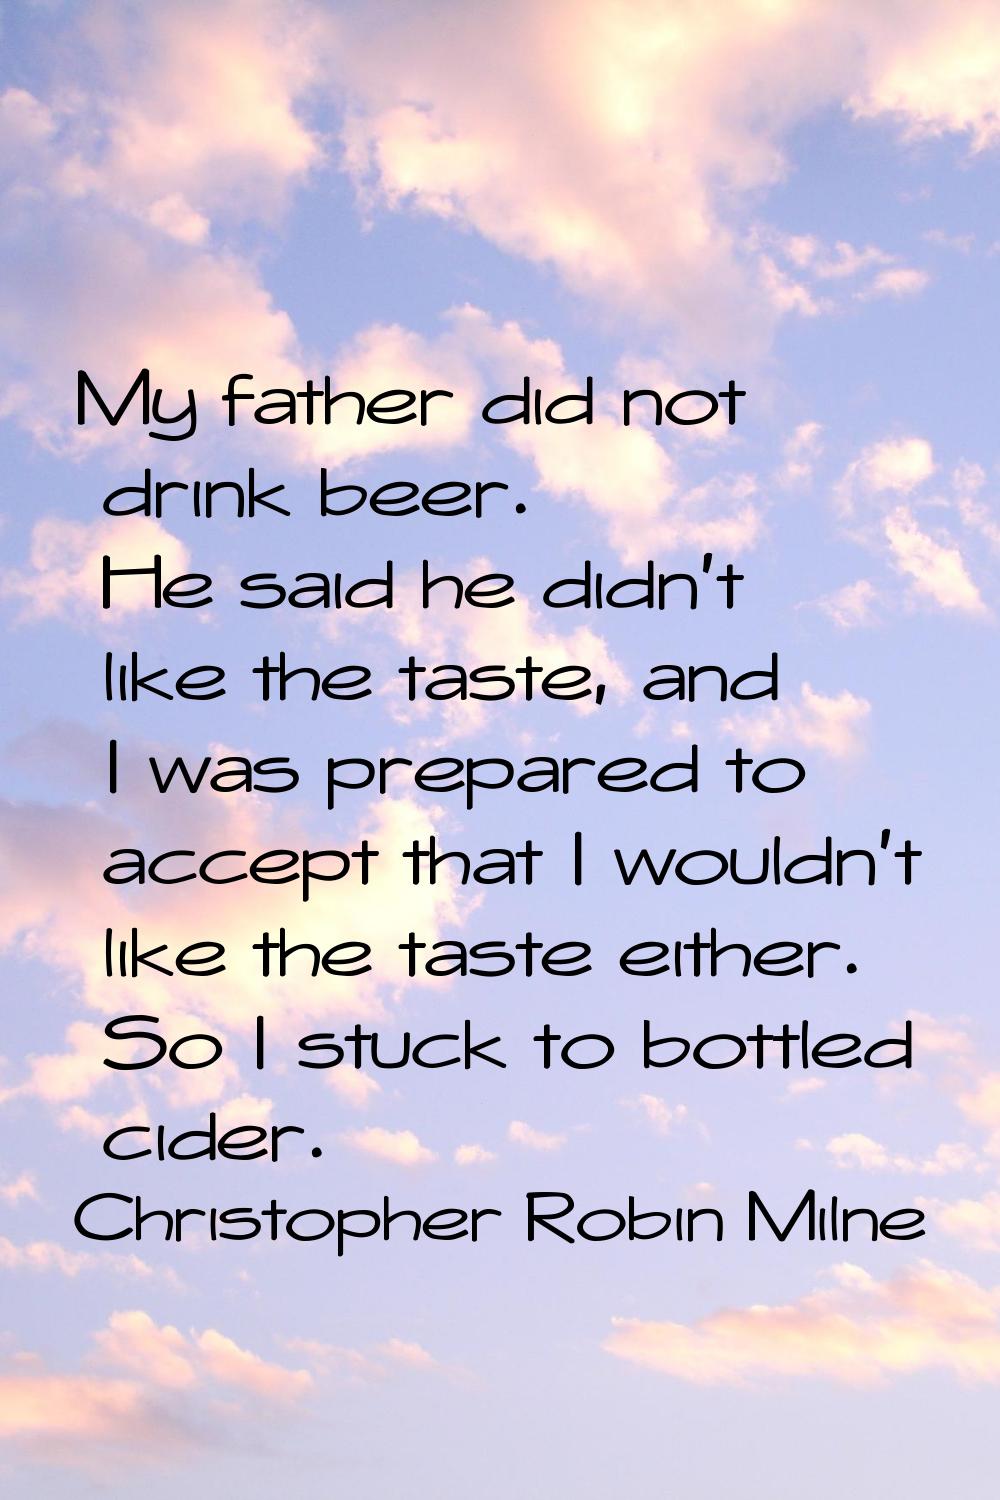 My father did not drink beer. He said he didn't like the taste, and I was prepared to accept that I